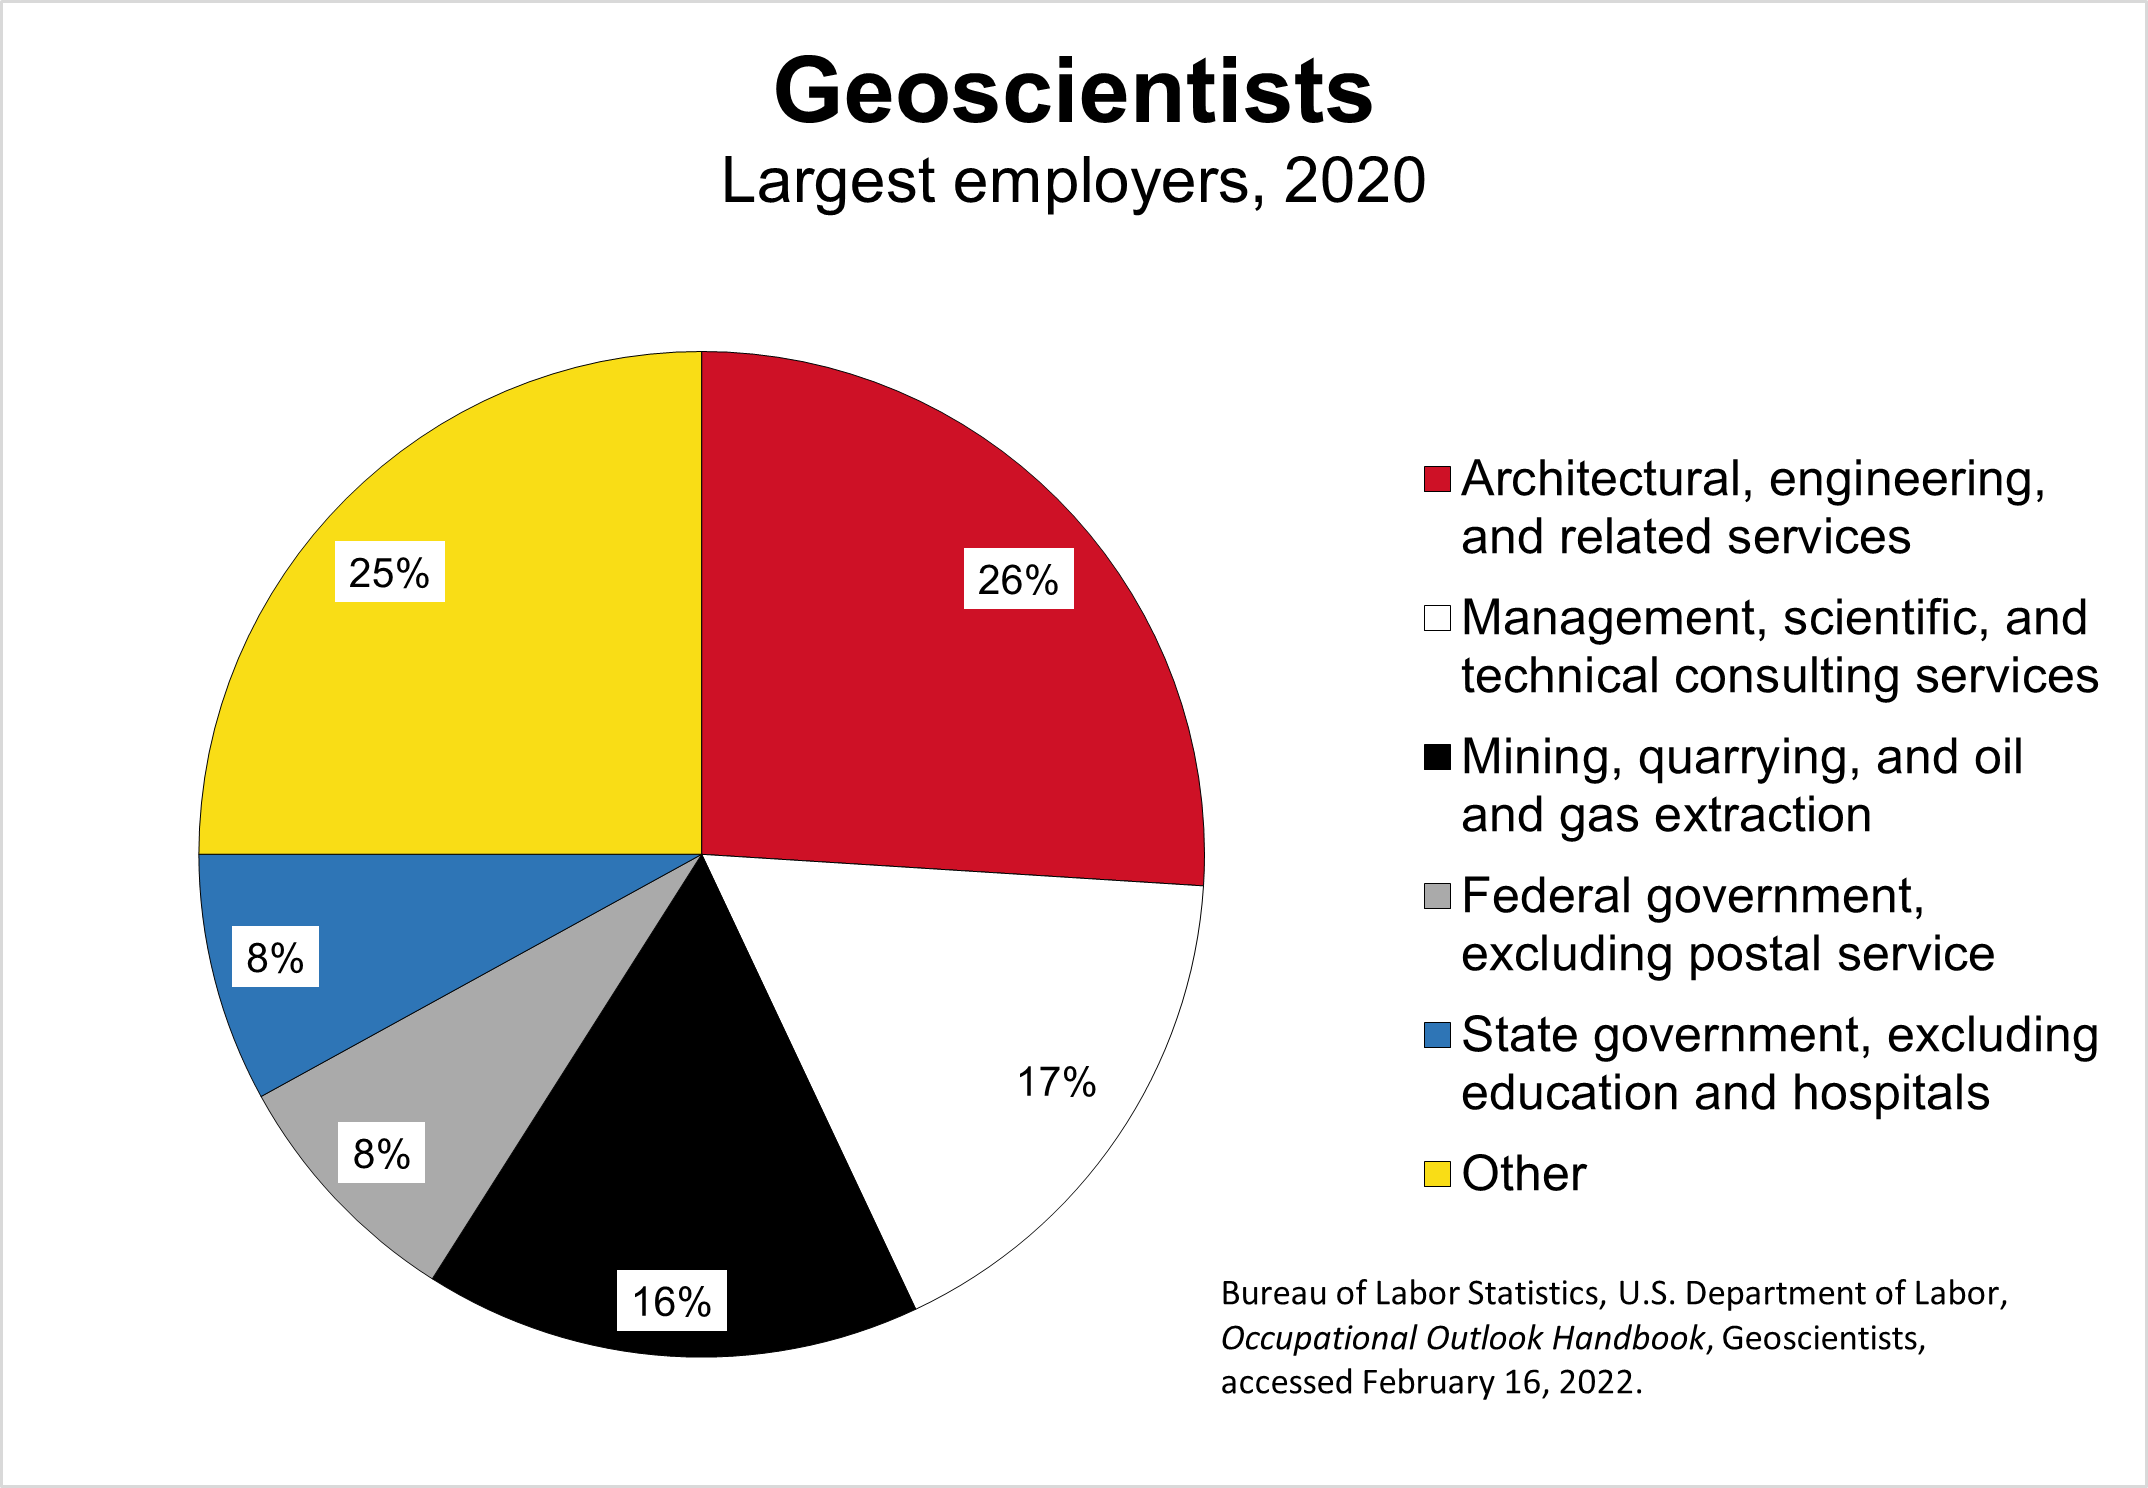 The largest employers of geoscientists in 2020 were: architectural, engineering, and related services (26%), management, scientific, and technical consulting services (17%), mining, quarrying, and oil and gas extraction (16%), federal government excluding postal service (8%), state government excluding education and hospitals (8%), and other (25%).  Source: Bureau of Labor Statistics, U.S. Department of Labor, Occupational Outlook Handbook, Geoscientists, accessed February 16, 2022.